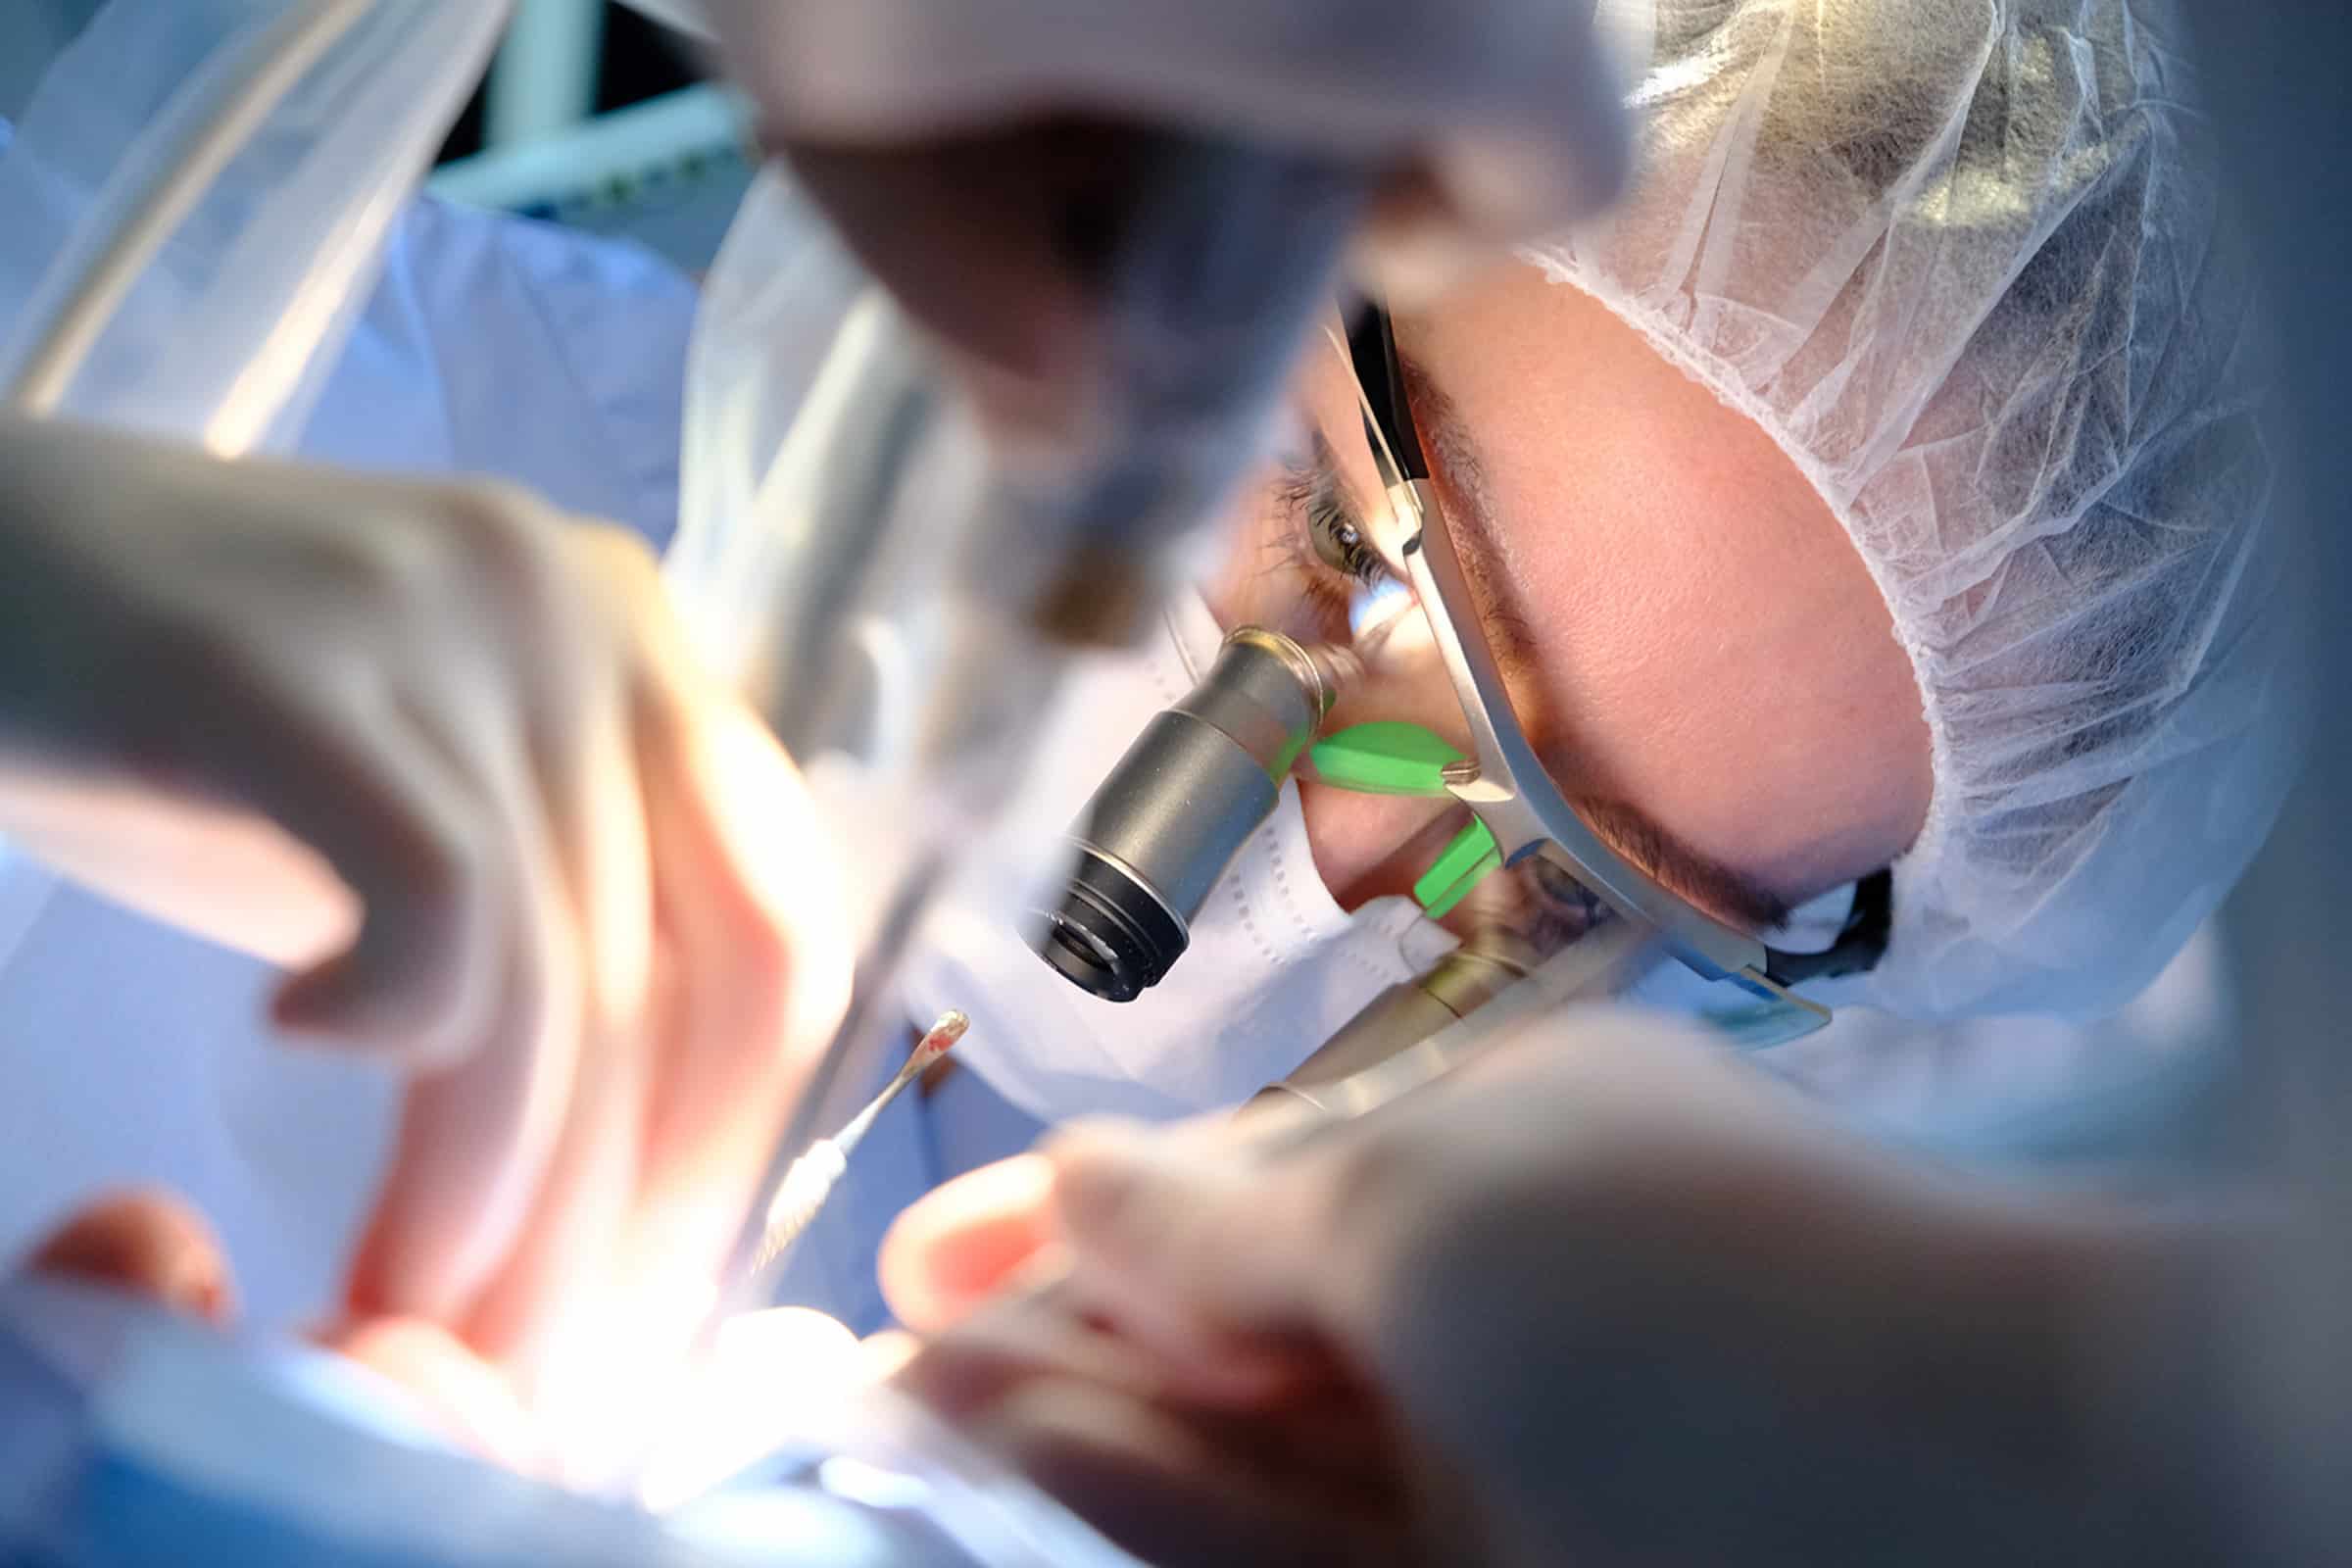 Dentist performing an All-on-4 implant procedure in Ridgeland, MS